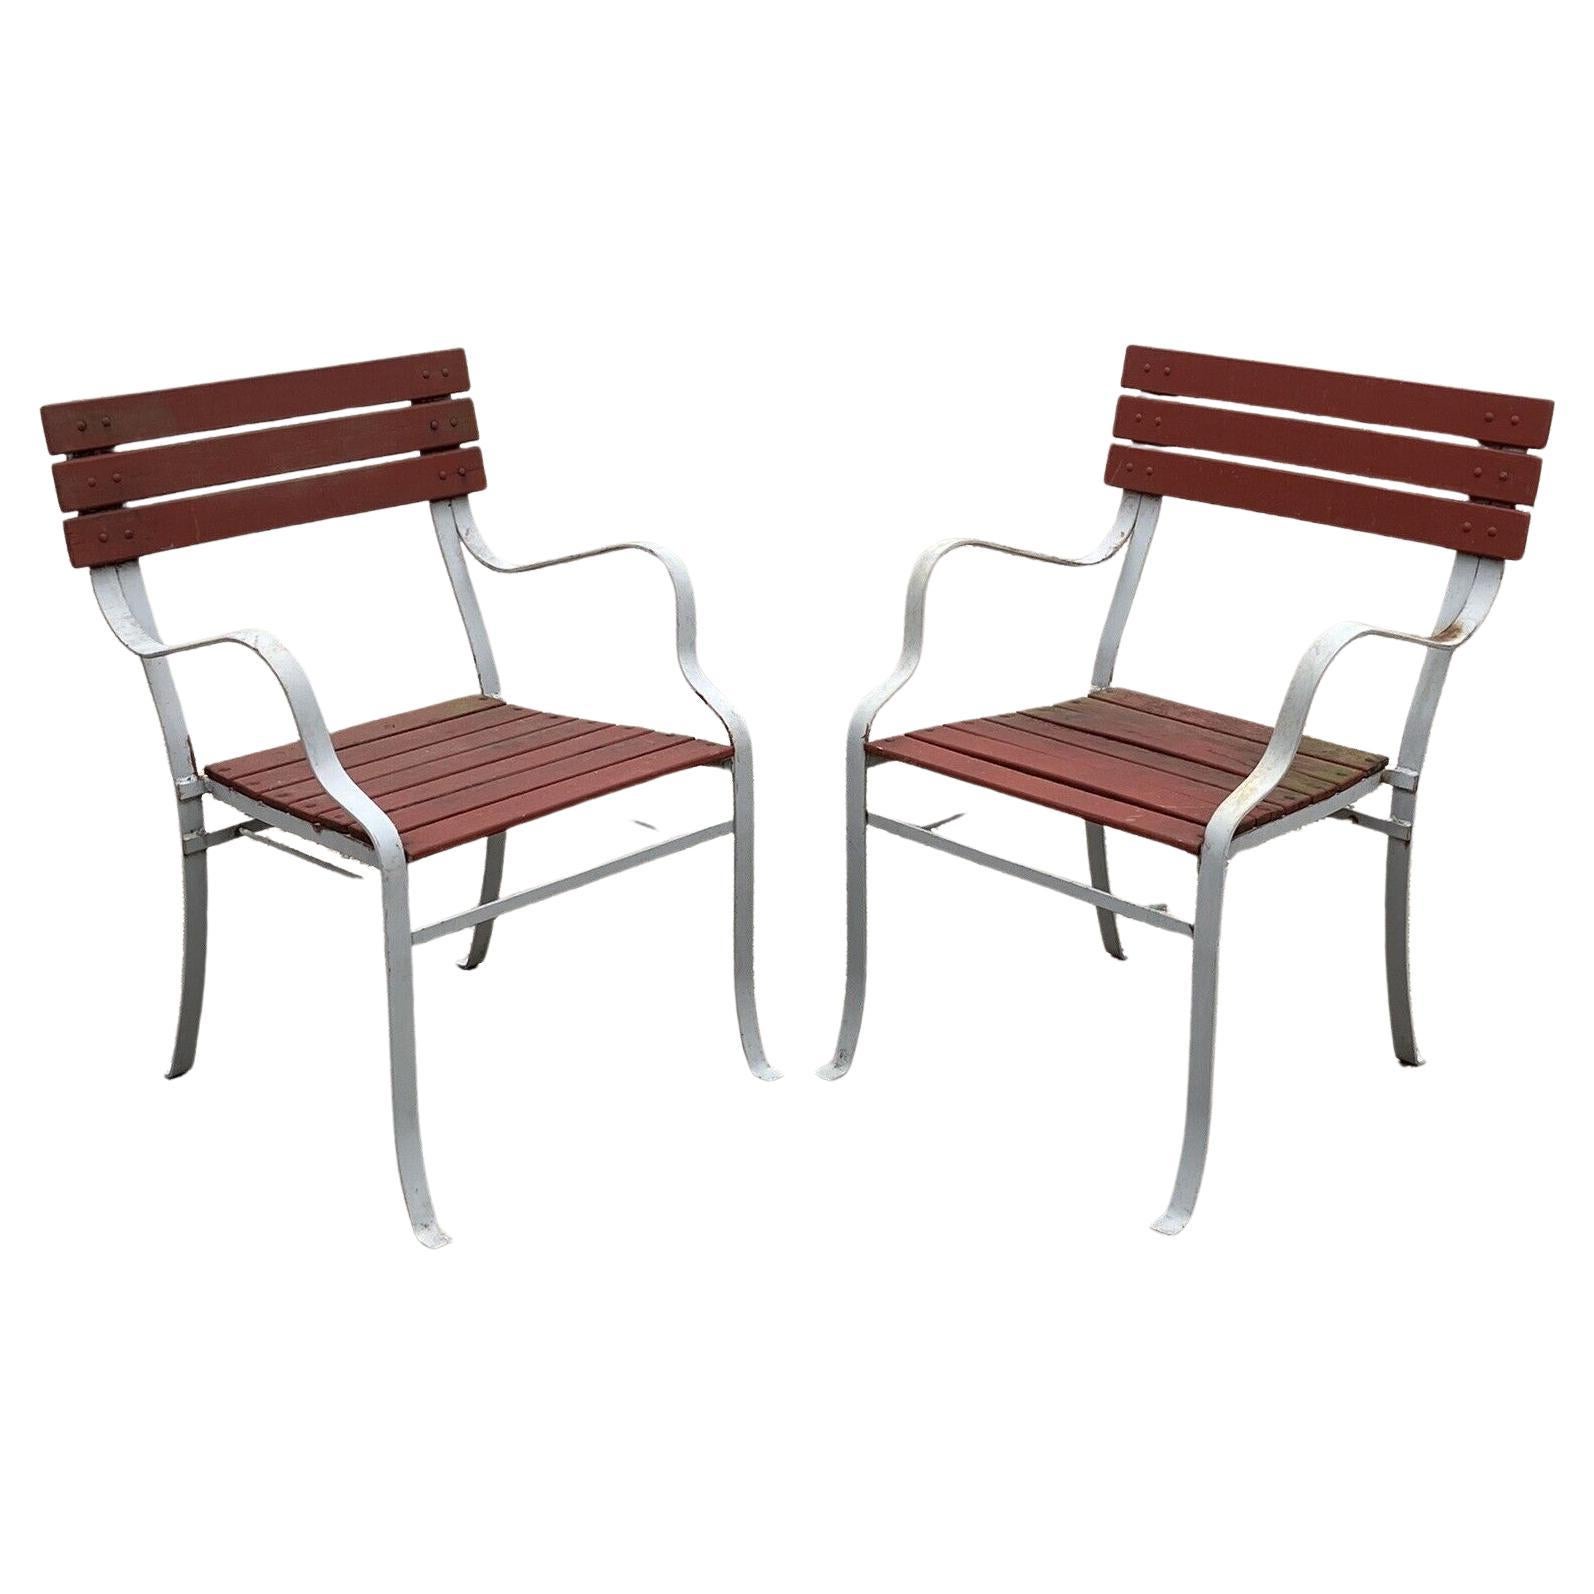 Vintage Wrought Iron and Wood Slat French Style Garden Outdoor Chairs, a Pair For Sale